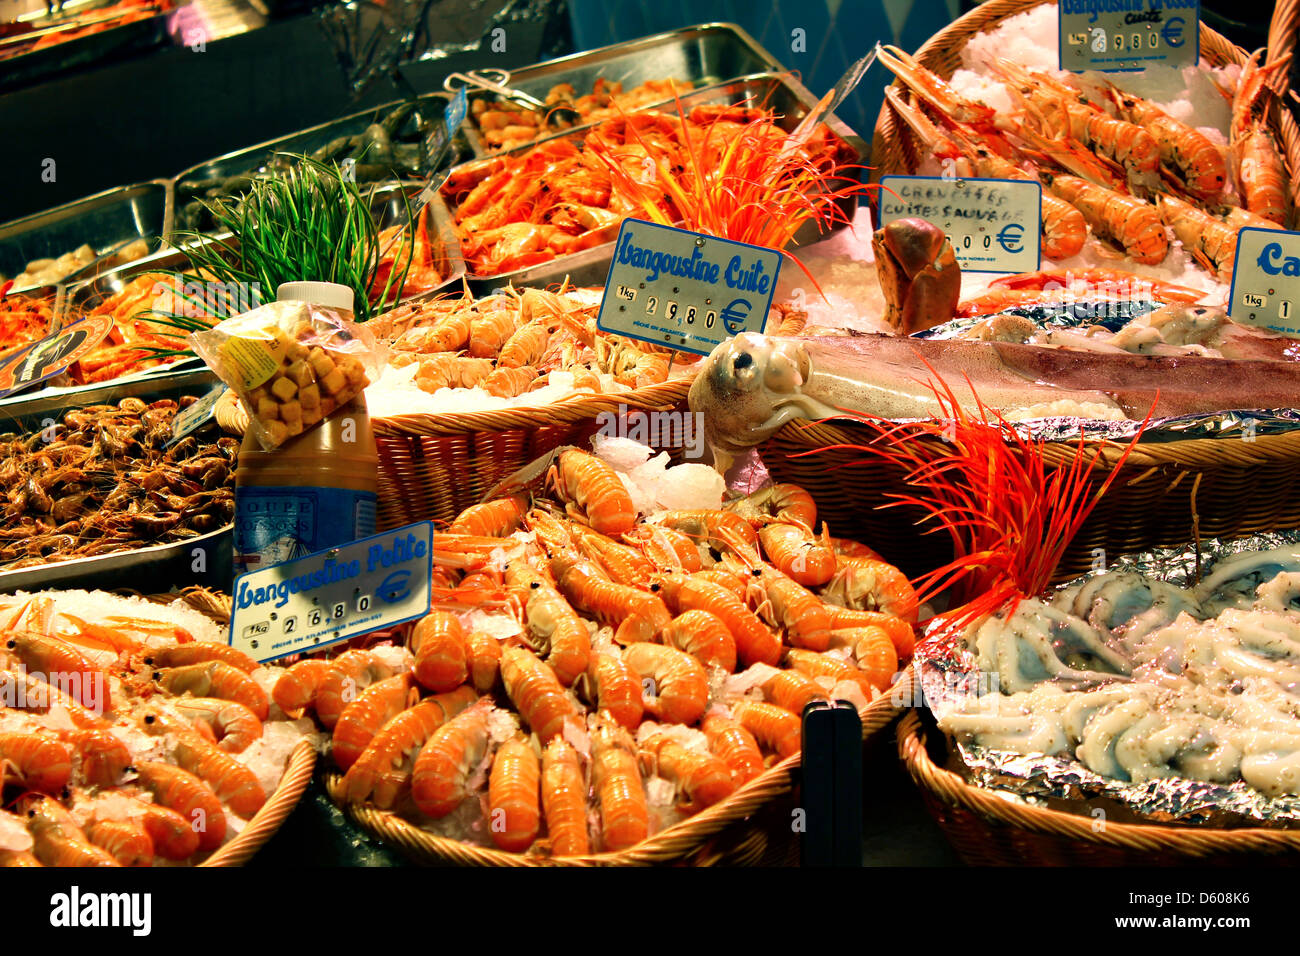 Seafood market stall in Paris, France Stock Photo